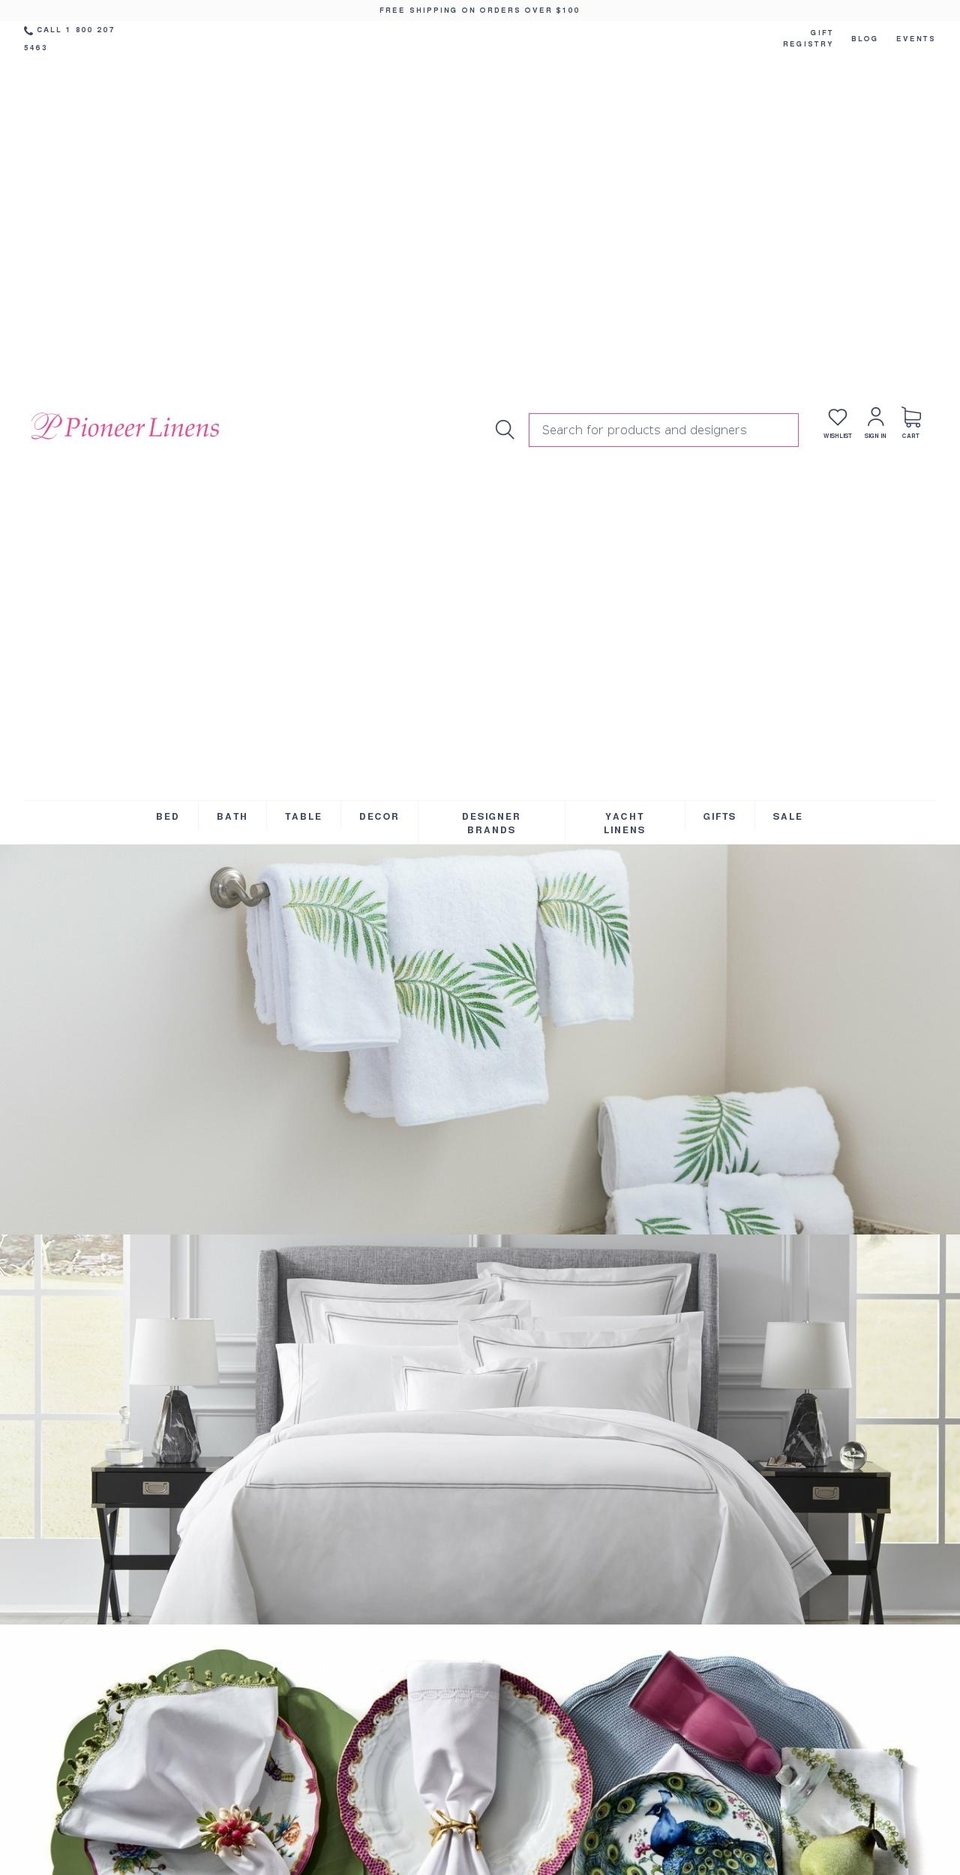 Buko Shopify Theme - Products Consolidation Shopify theme site example lauderdalelinens.com